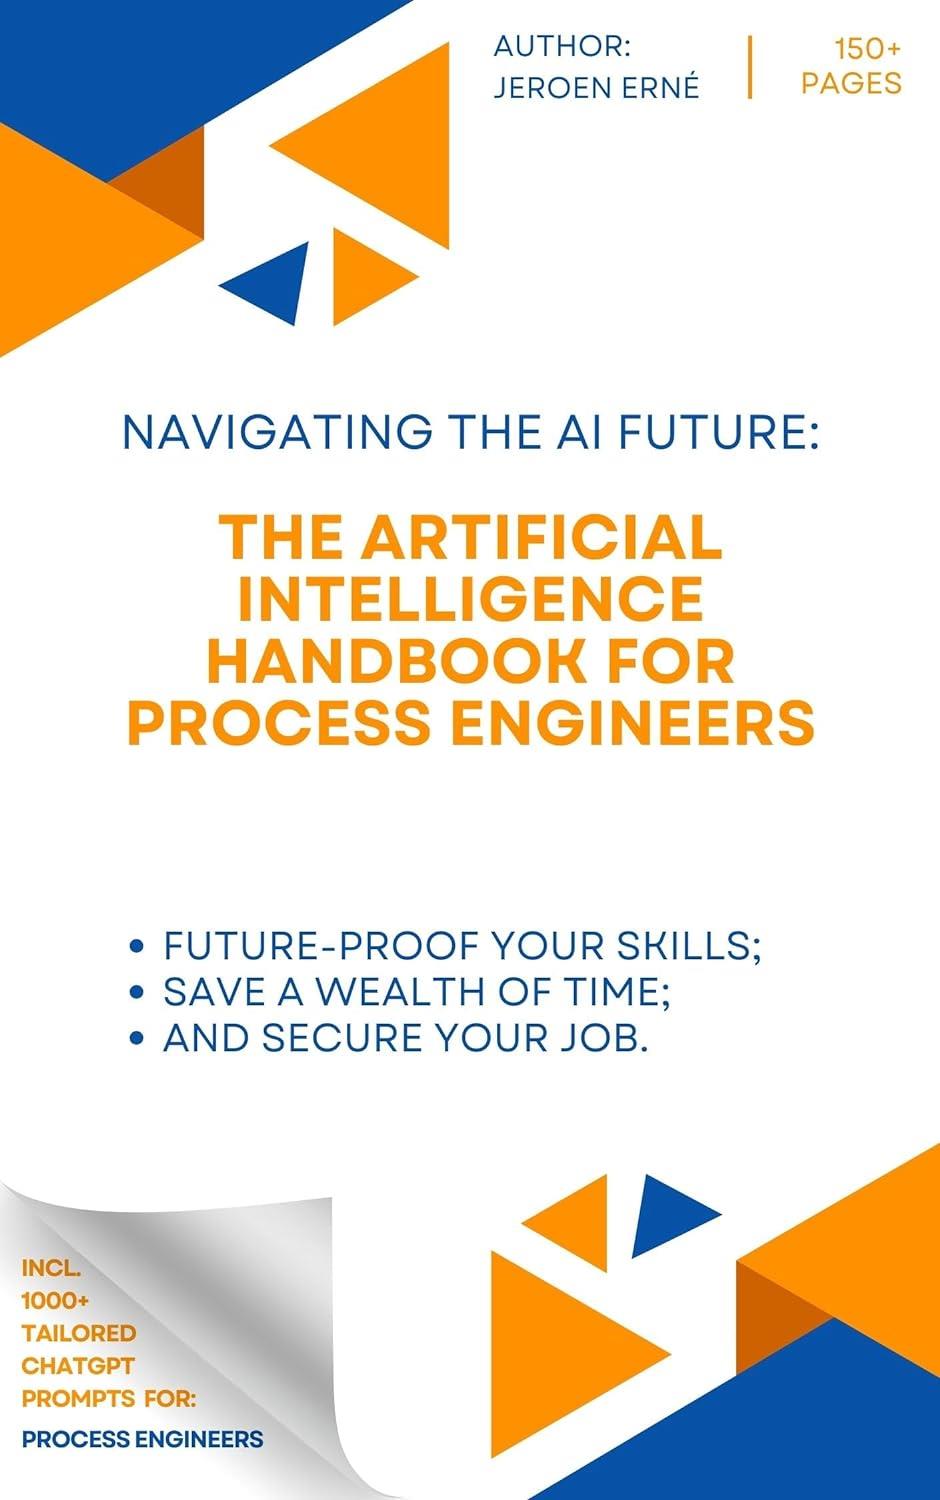 The Artificial Intelligence Handbook for Process Engineers